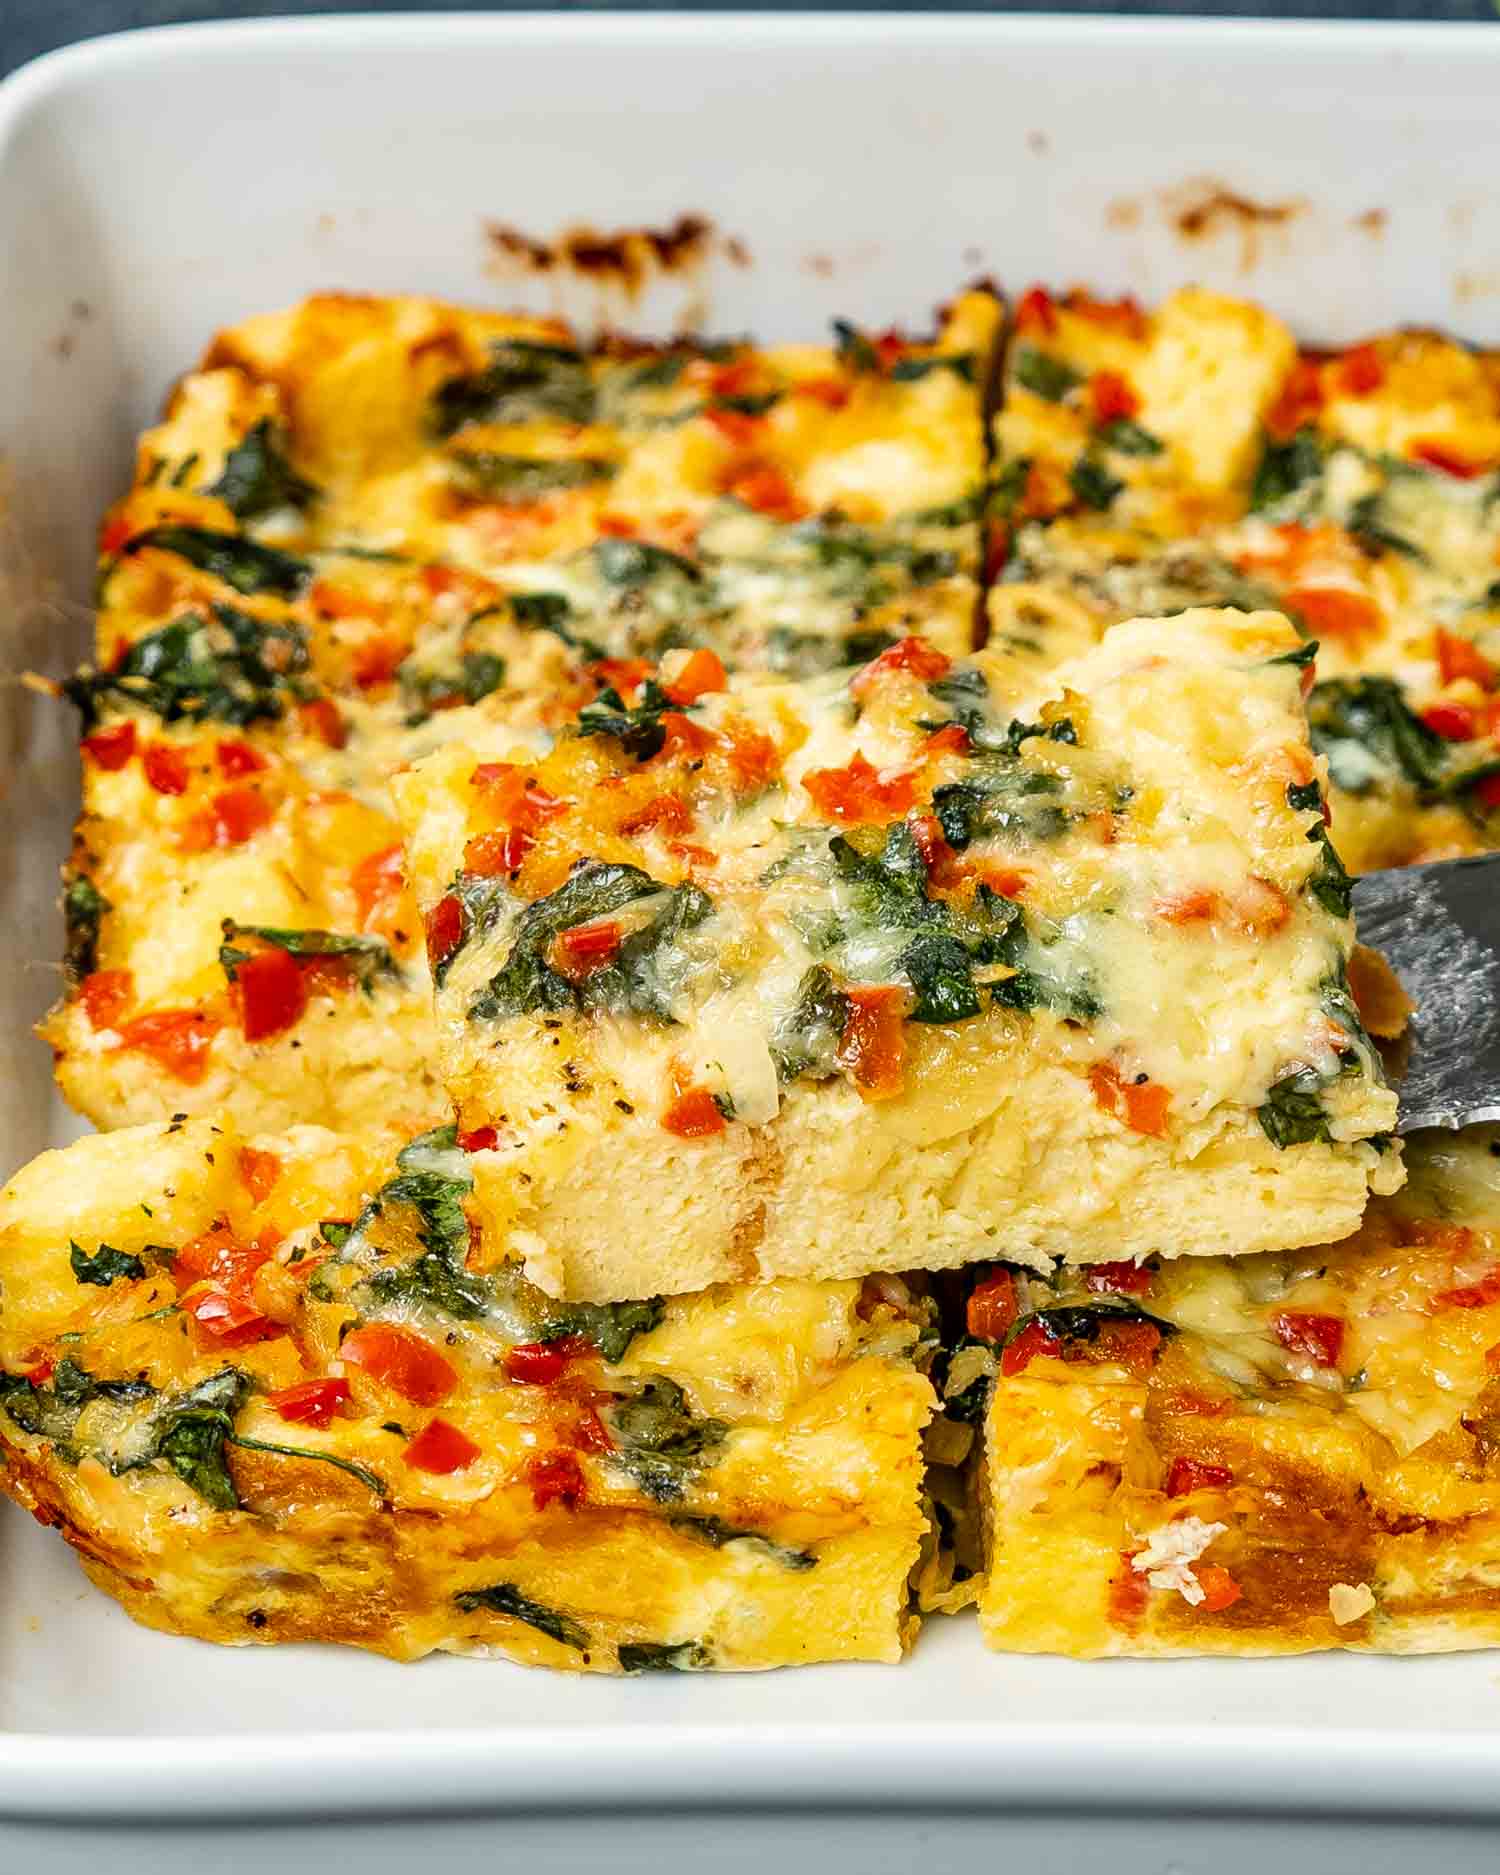 freshly baked strata cut into pieces in a white casserole dish.